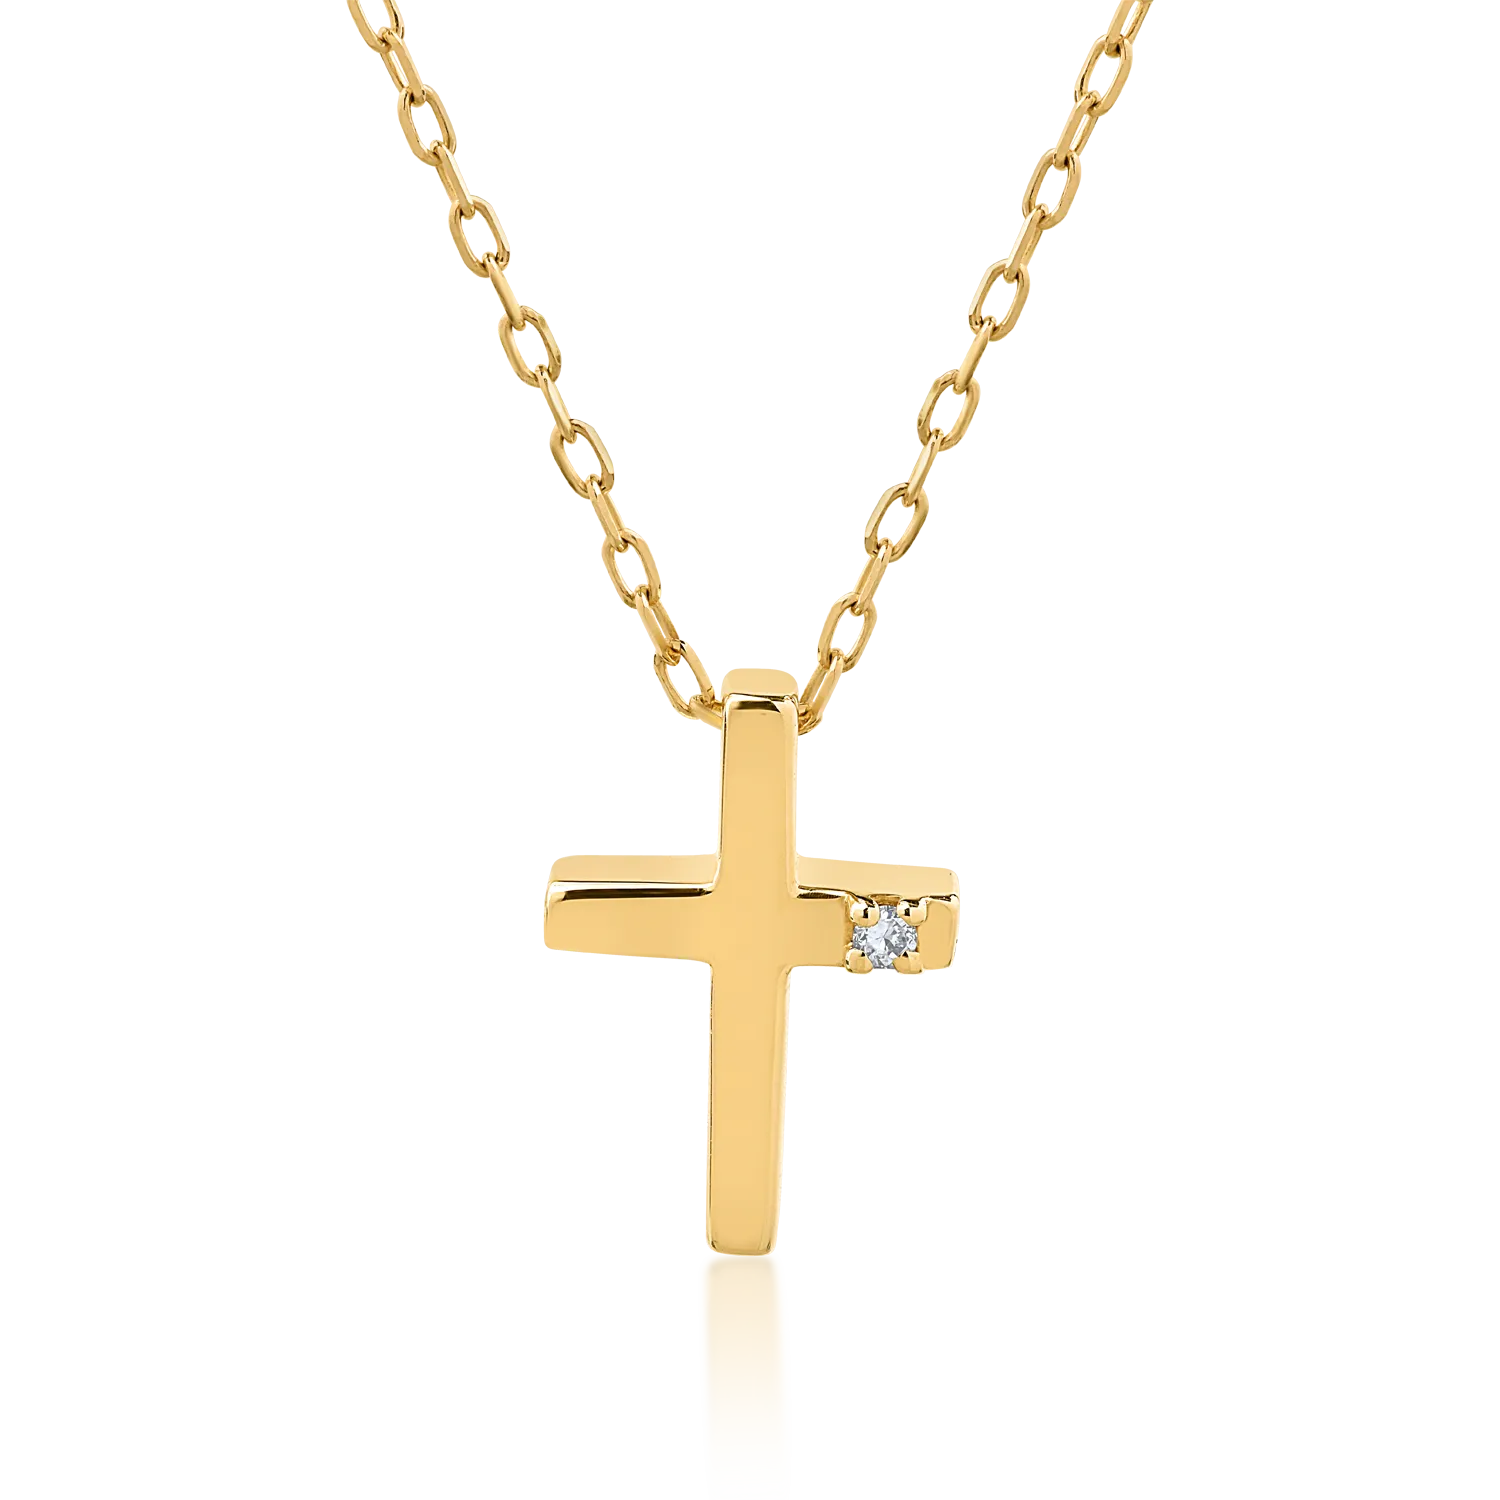 18K yellow gold cross pendant necklace with 0.006ct diamond